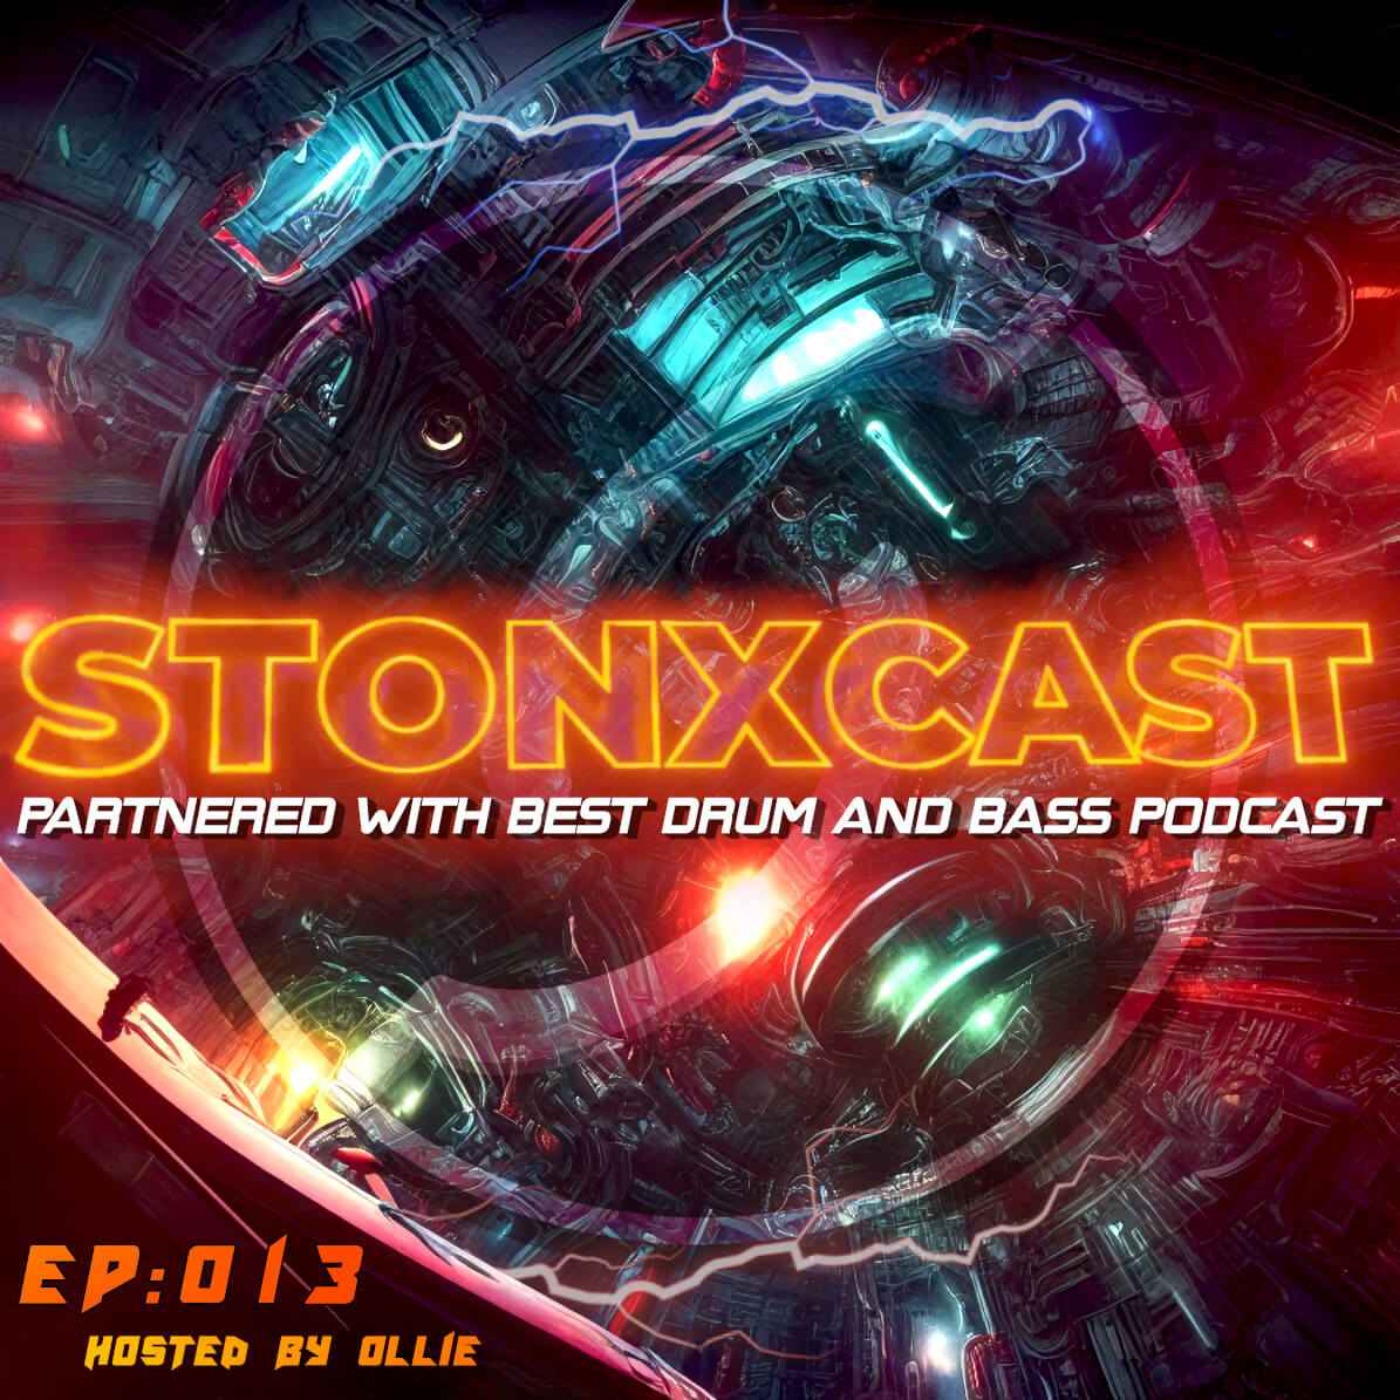 Stonxcast EP:013 - Hosted by Ollie Artwork